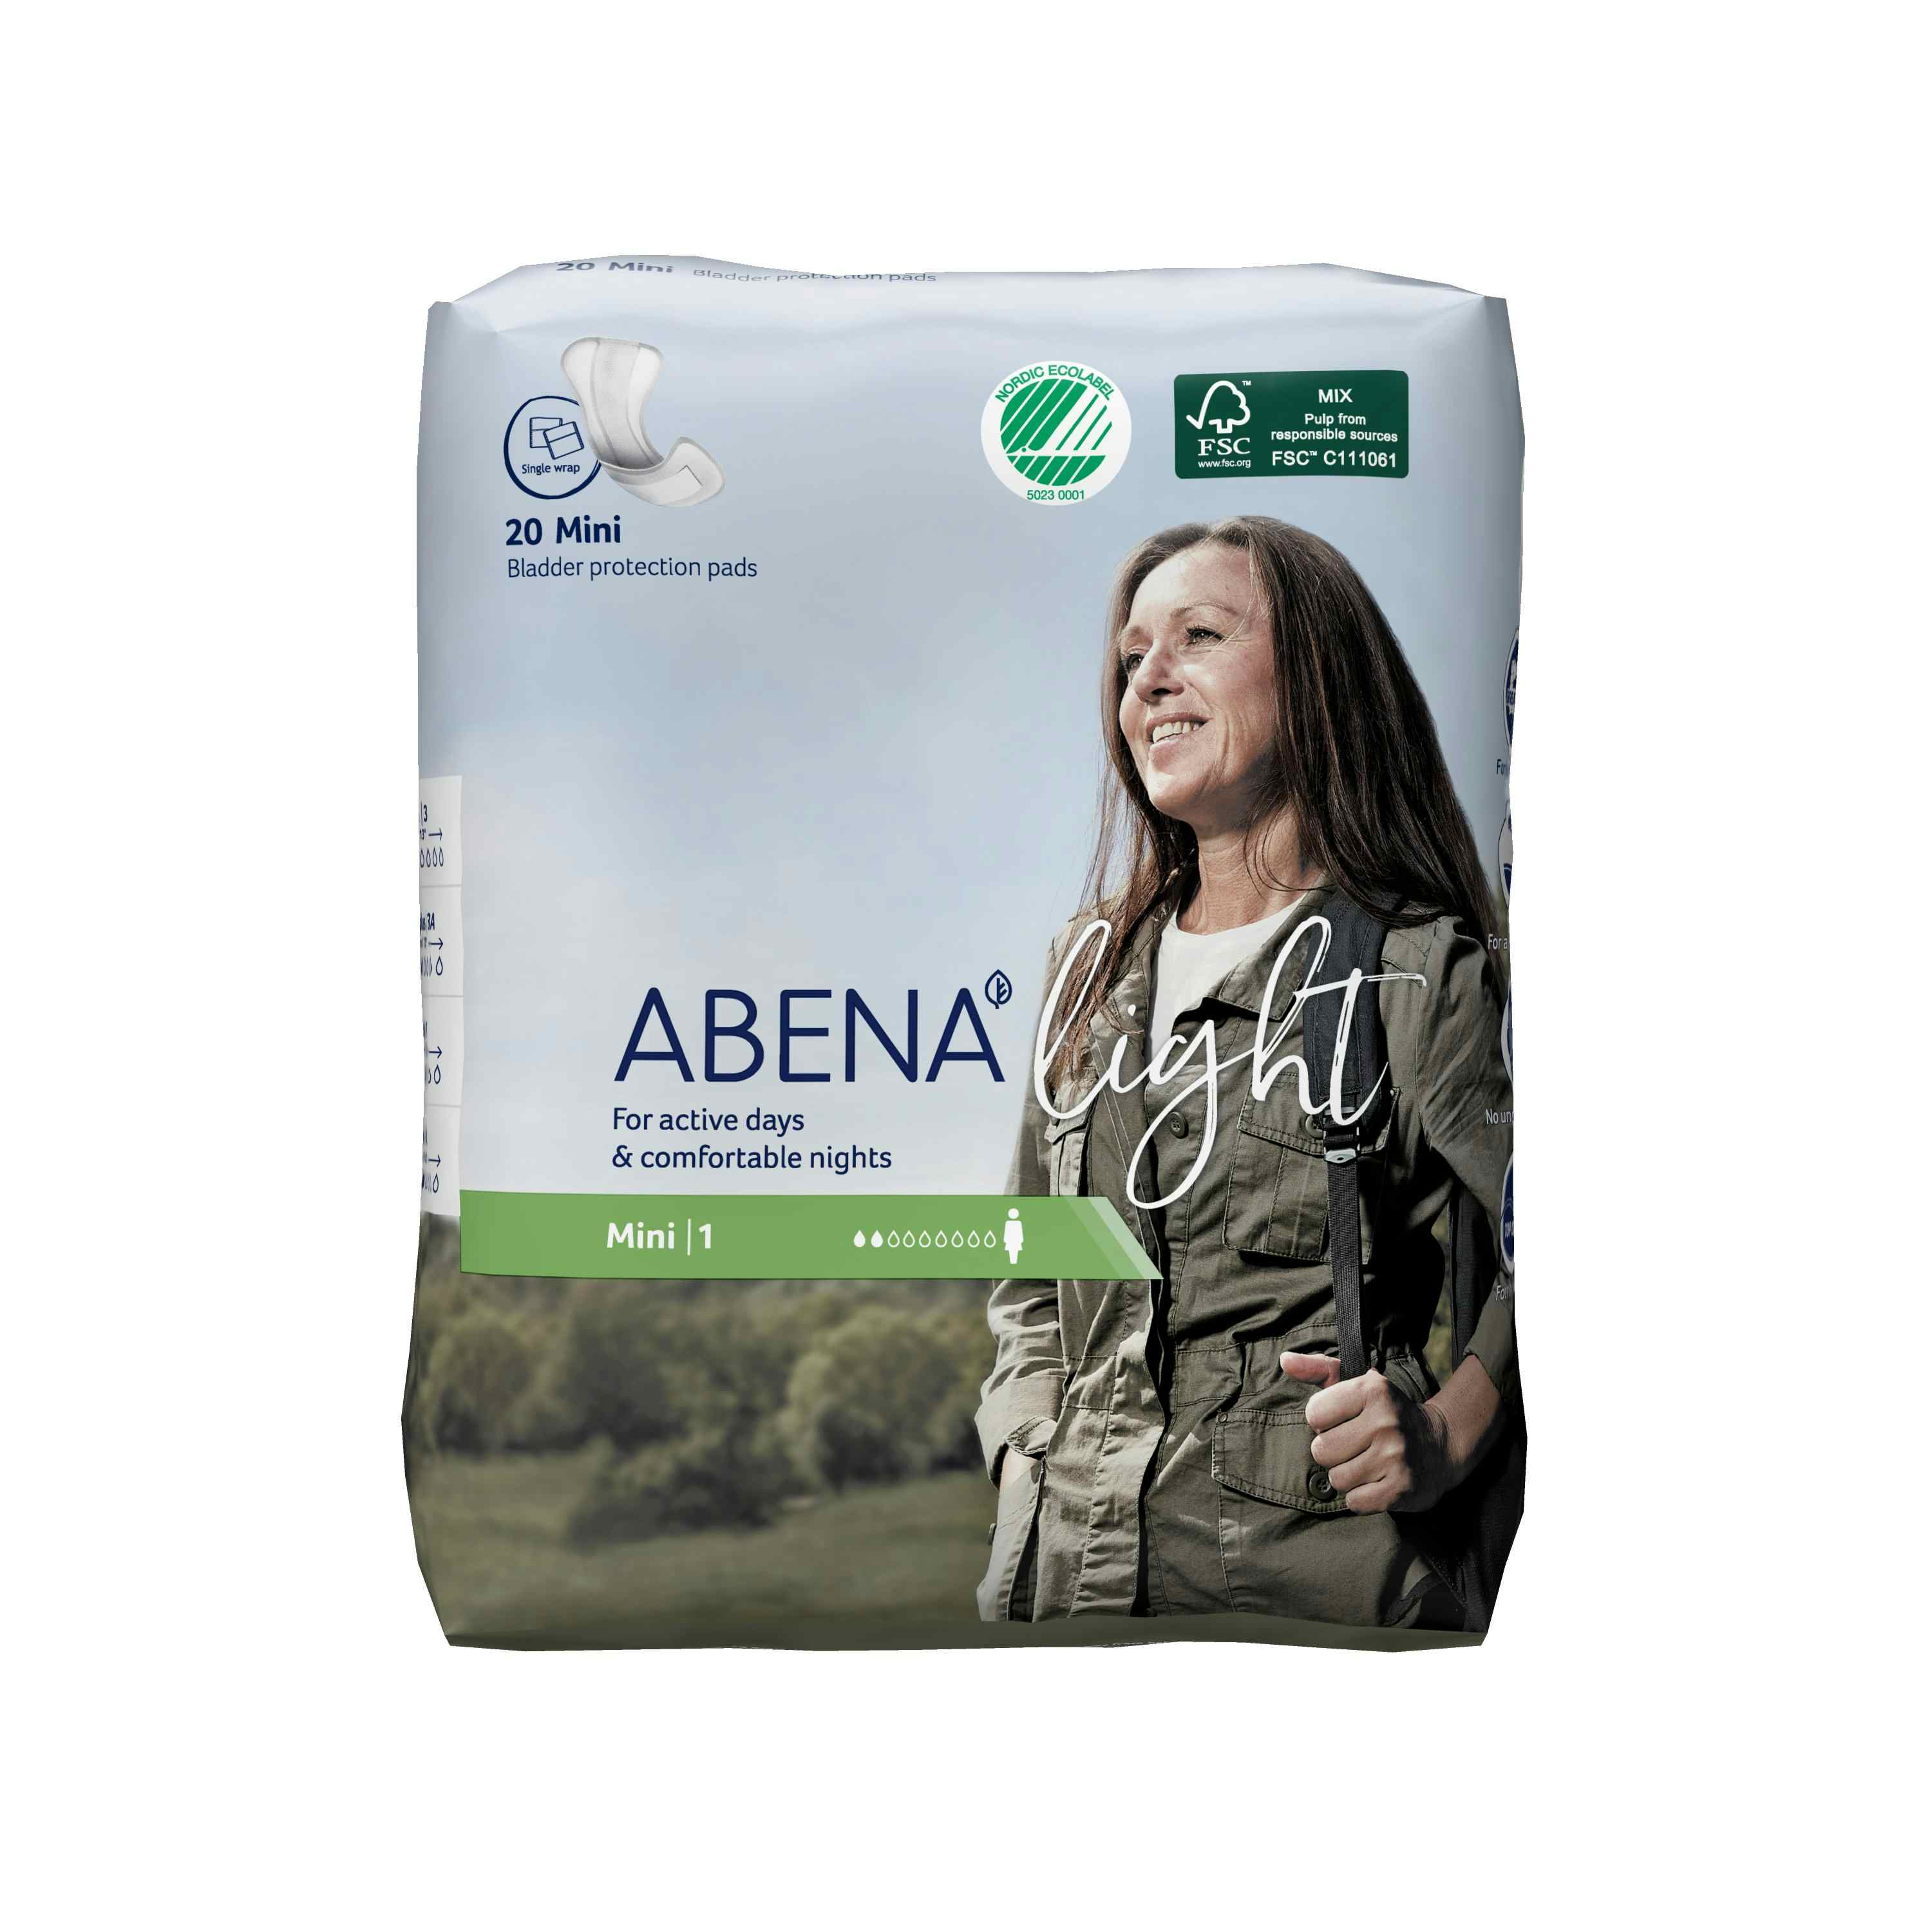 Abena Light Mini Disposable Unisex Adult Bladder Control Pad, Light Absorbency, 1000017155, One Size Fits Most -  Bag of 20